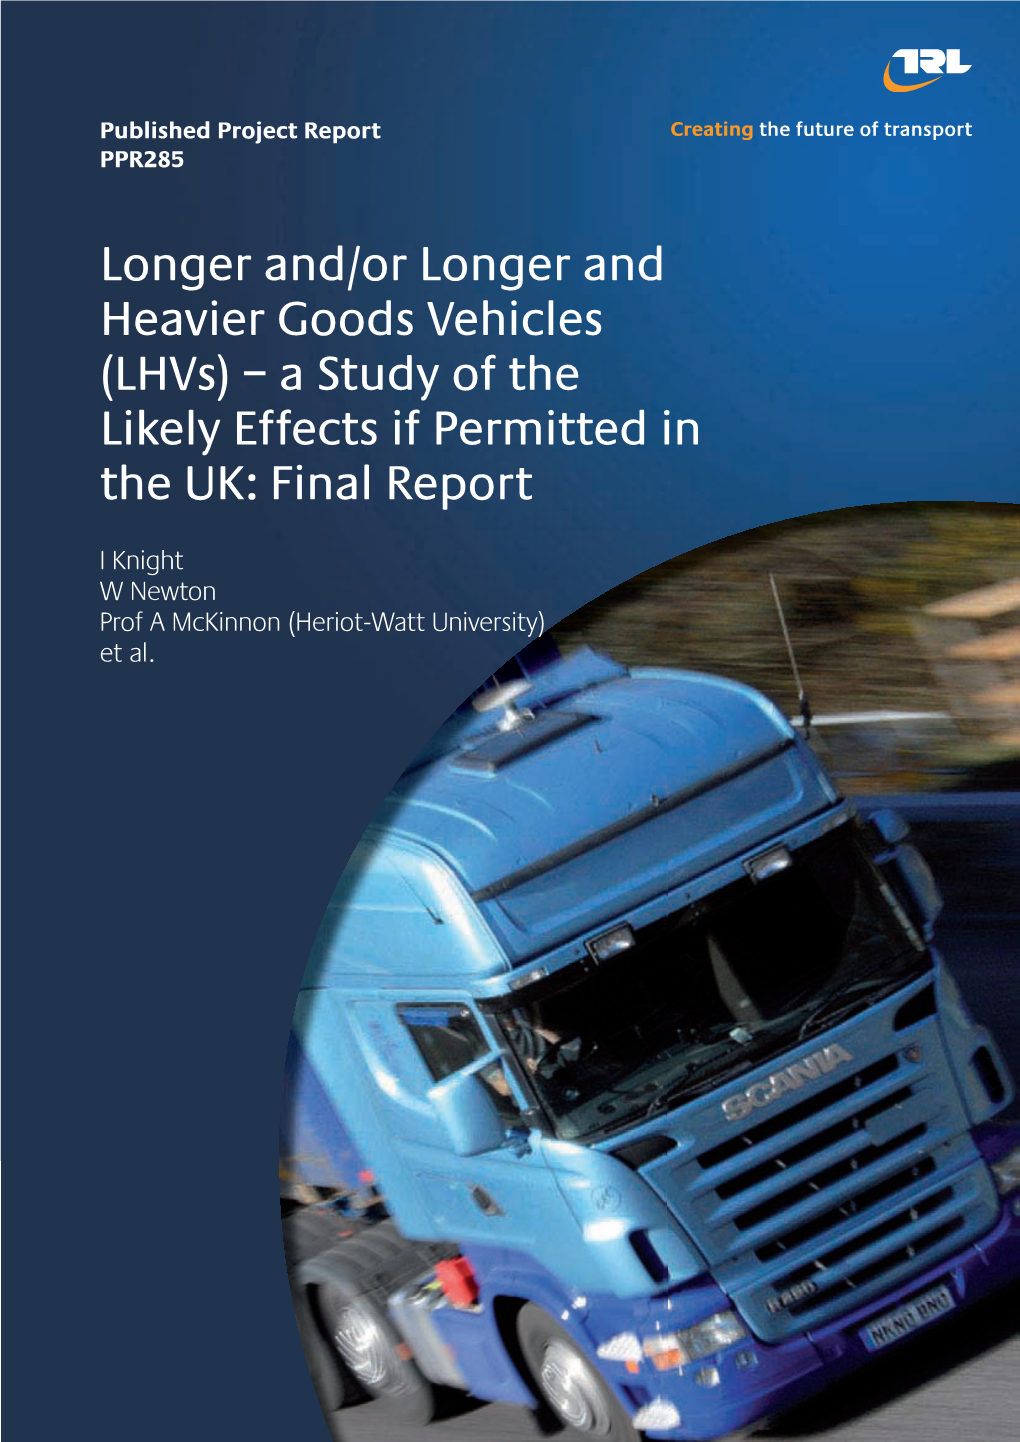 (Lhvs) – a Study of the Effects If Permitted in the UK: Final Report